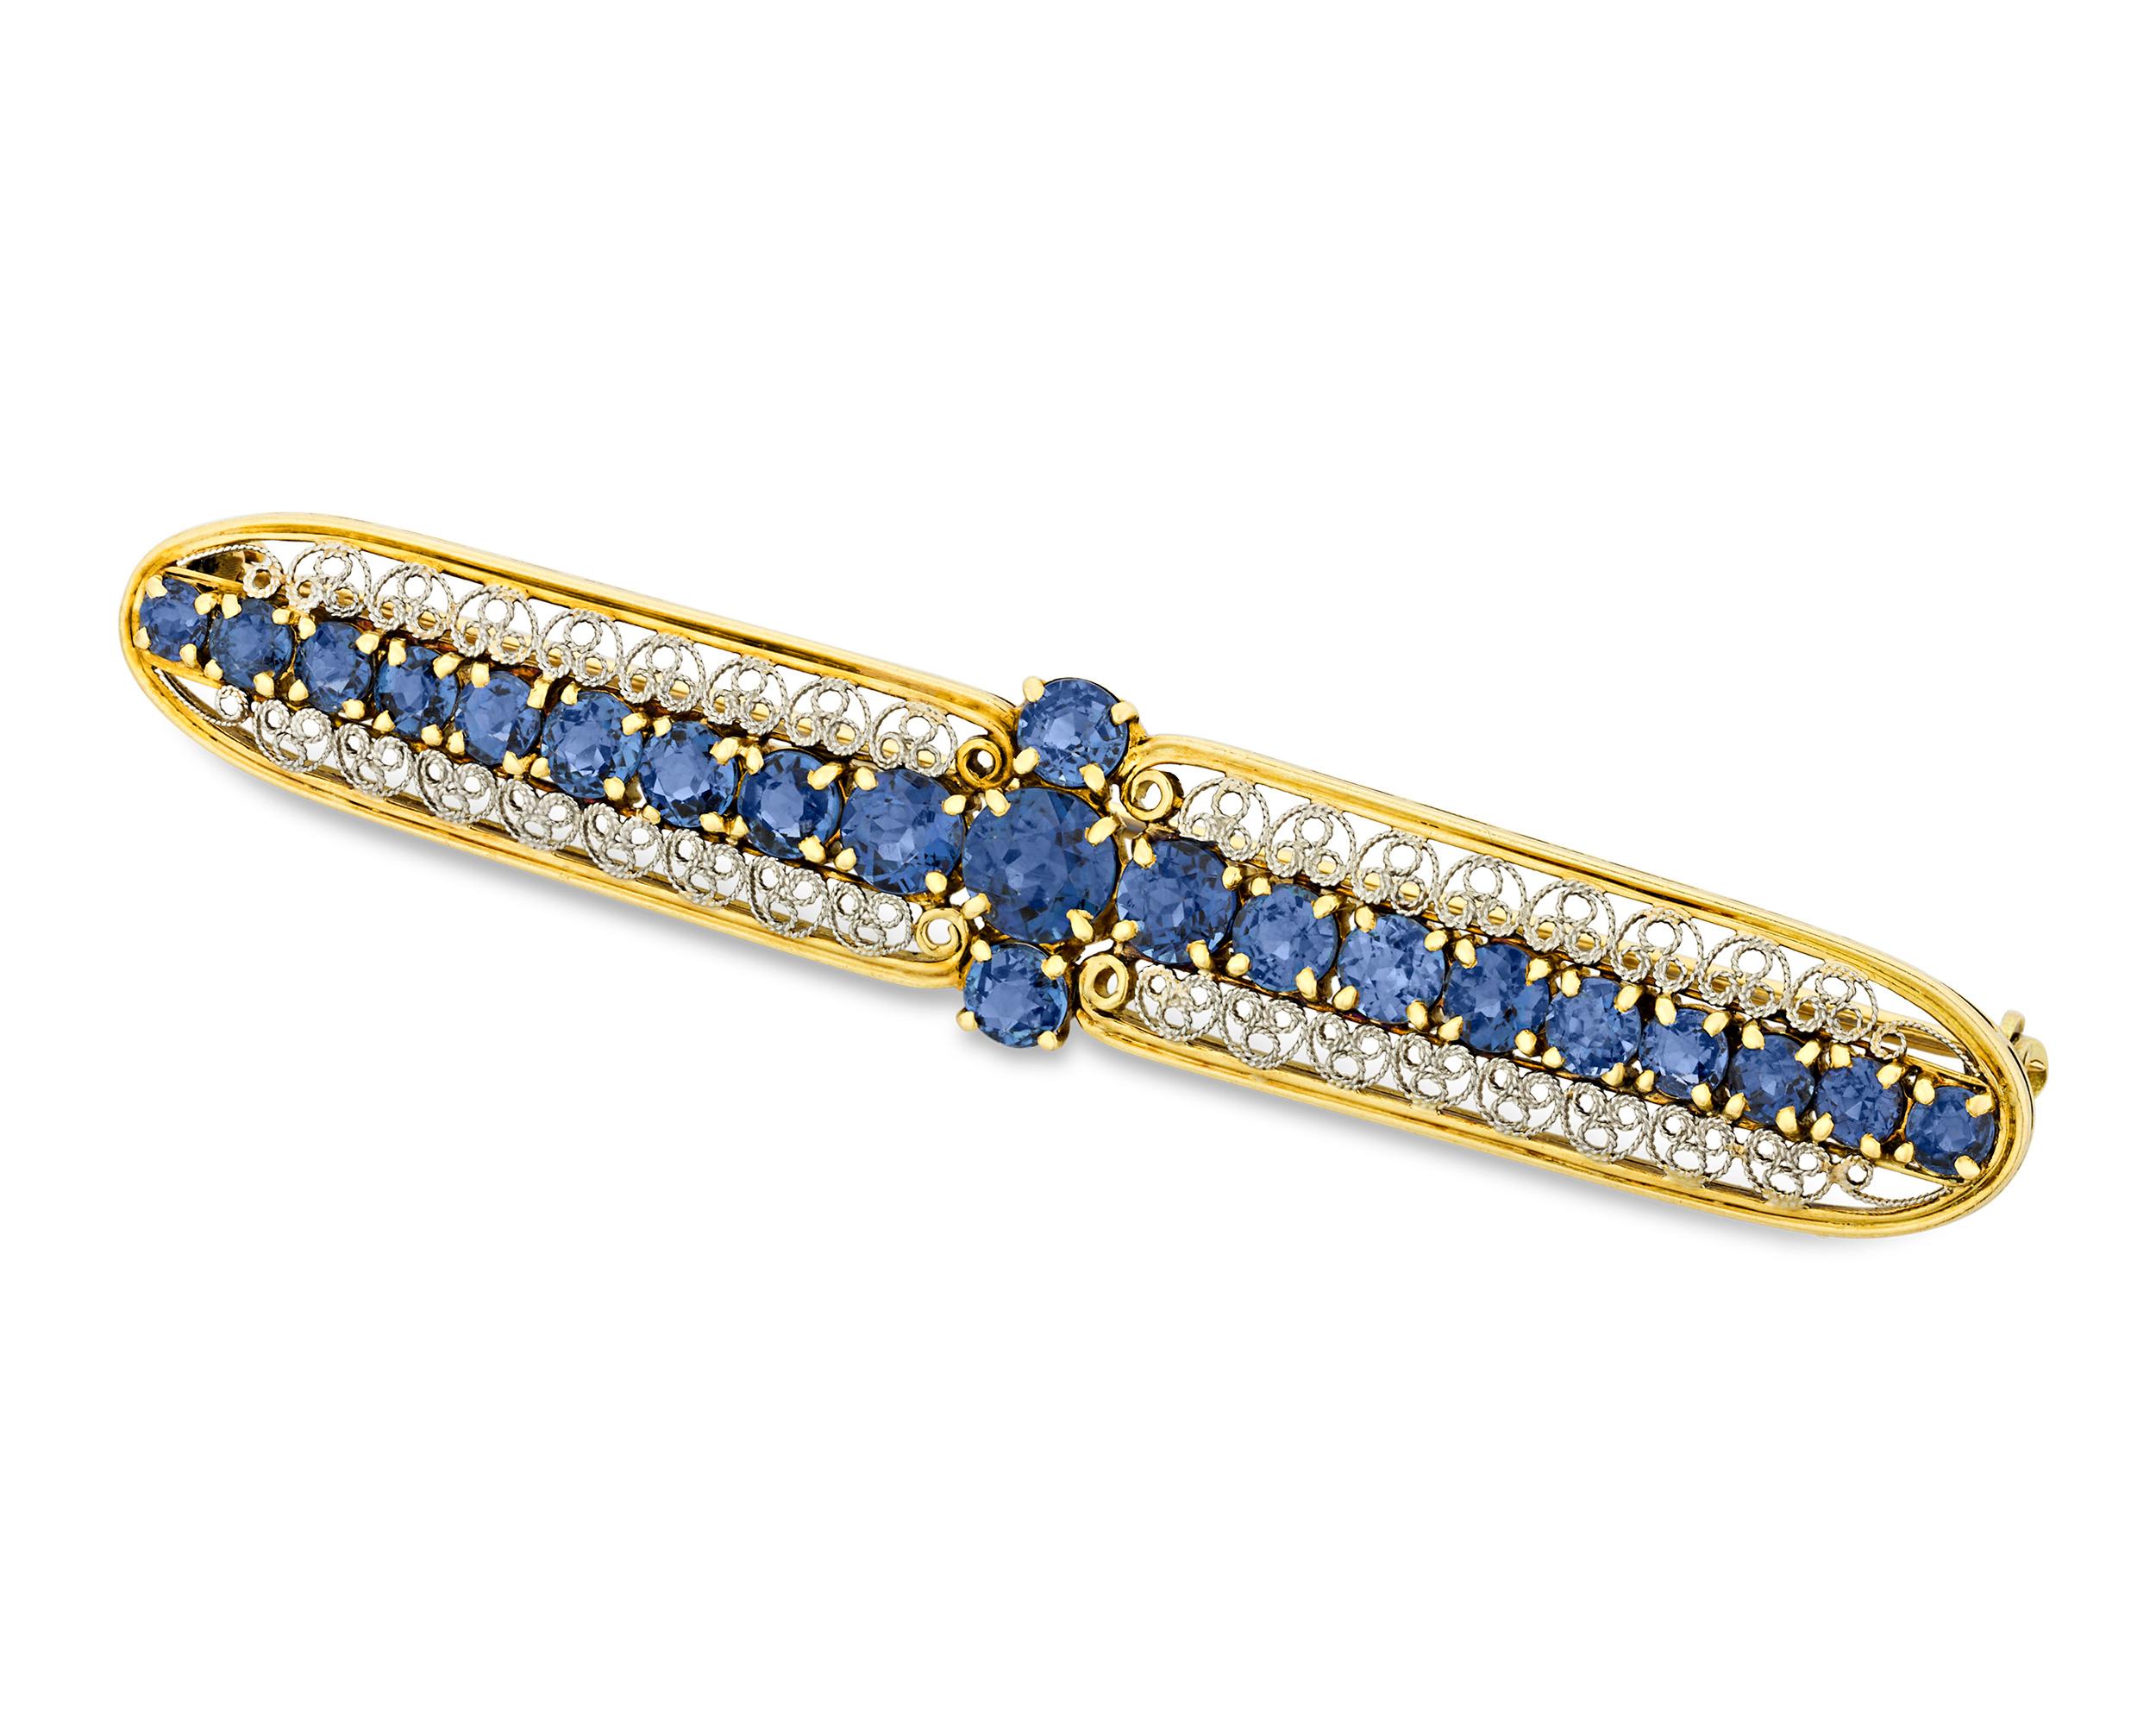 Velvet blue sapphires line this exquisite and incredibly rare brooch crafted by the legendary artist and designer Louis Comfort Tiffany for Tiffany & Co., An important and unique masterpiece of jewelry design, this delicately crafted pin showcases